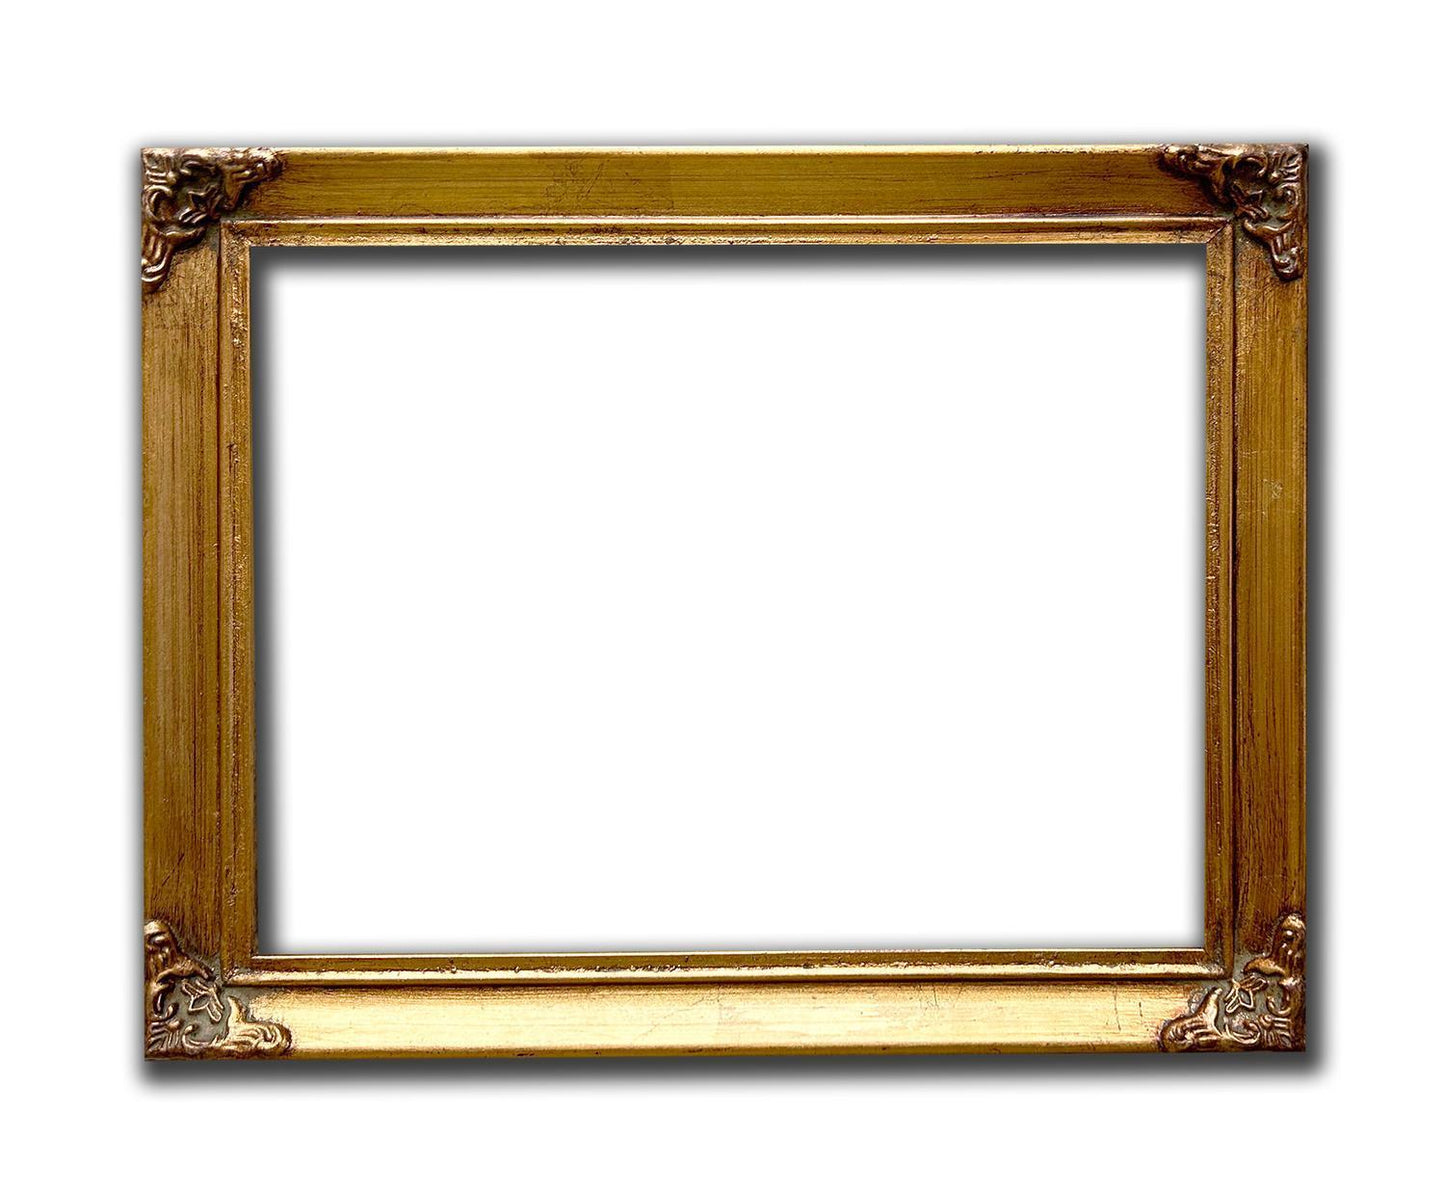 16x21 cm or 6x8 ins, wooden photo frame